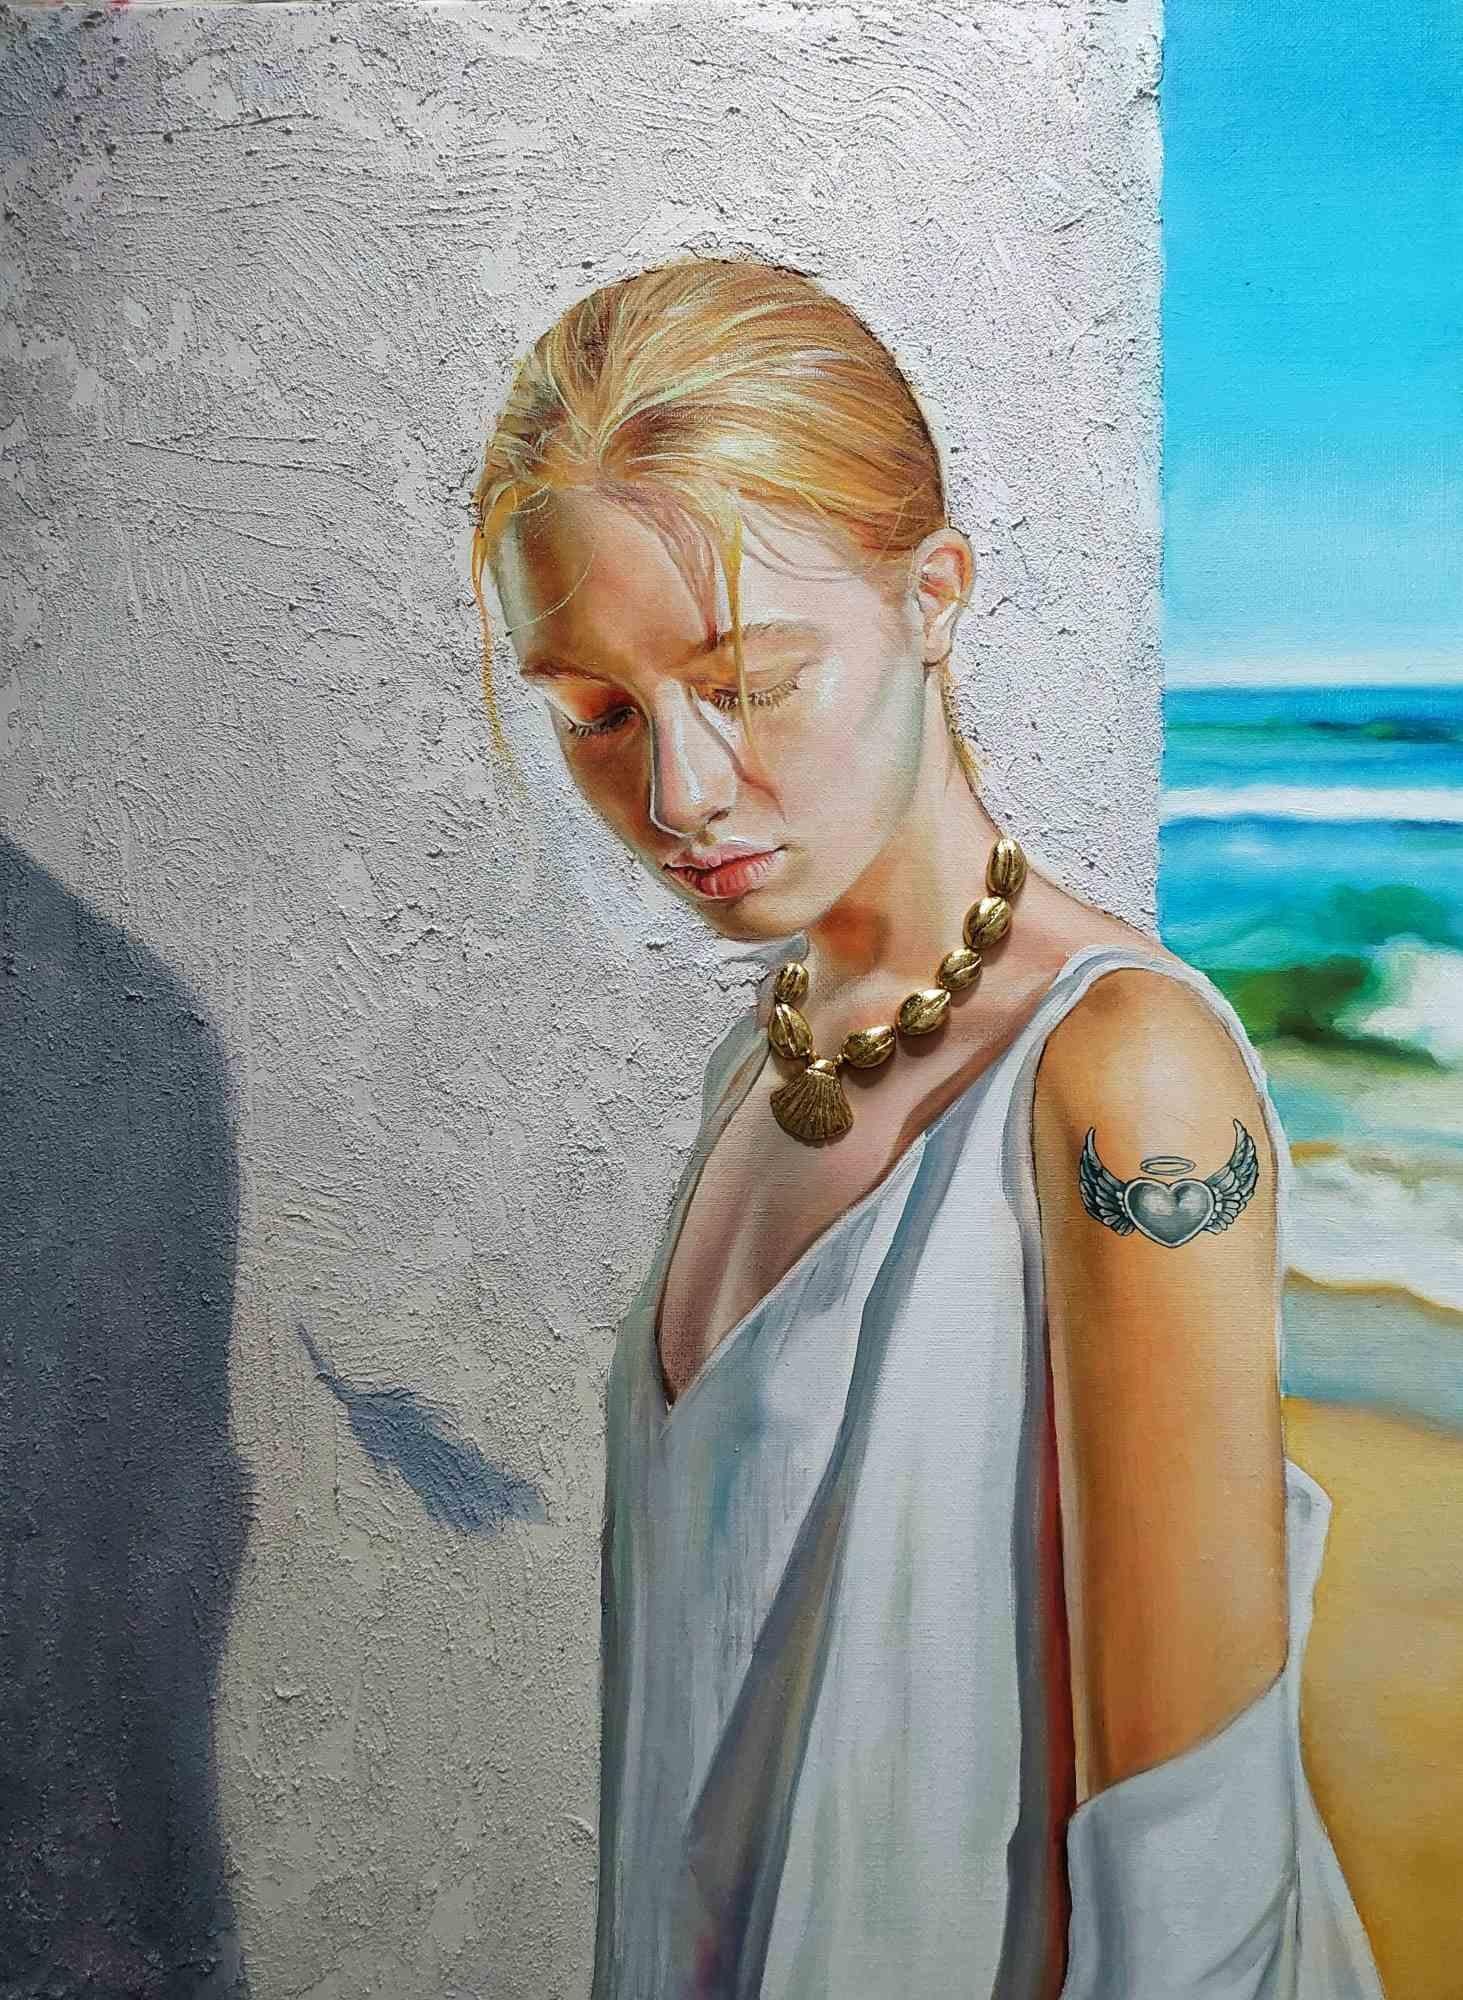 "Tell me on a Sunday" is an oil on canvas painting with gold leaf, clay and acrylic paste, cm 80x60.

It portrays a girl immersed in a summer light, the background of the sea can be glimpsed behind the wall. Her expression reflects a kind of